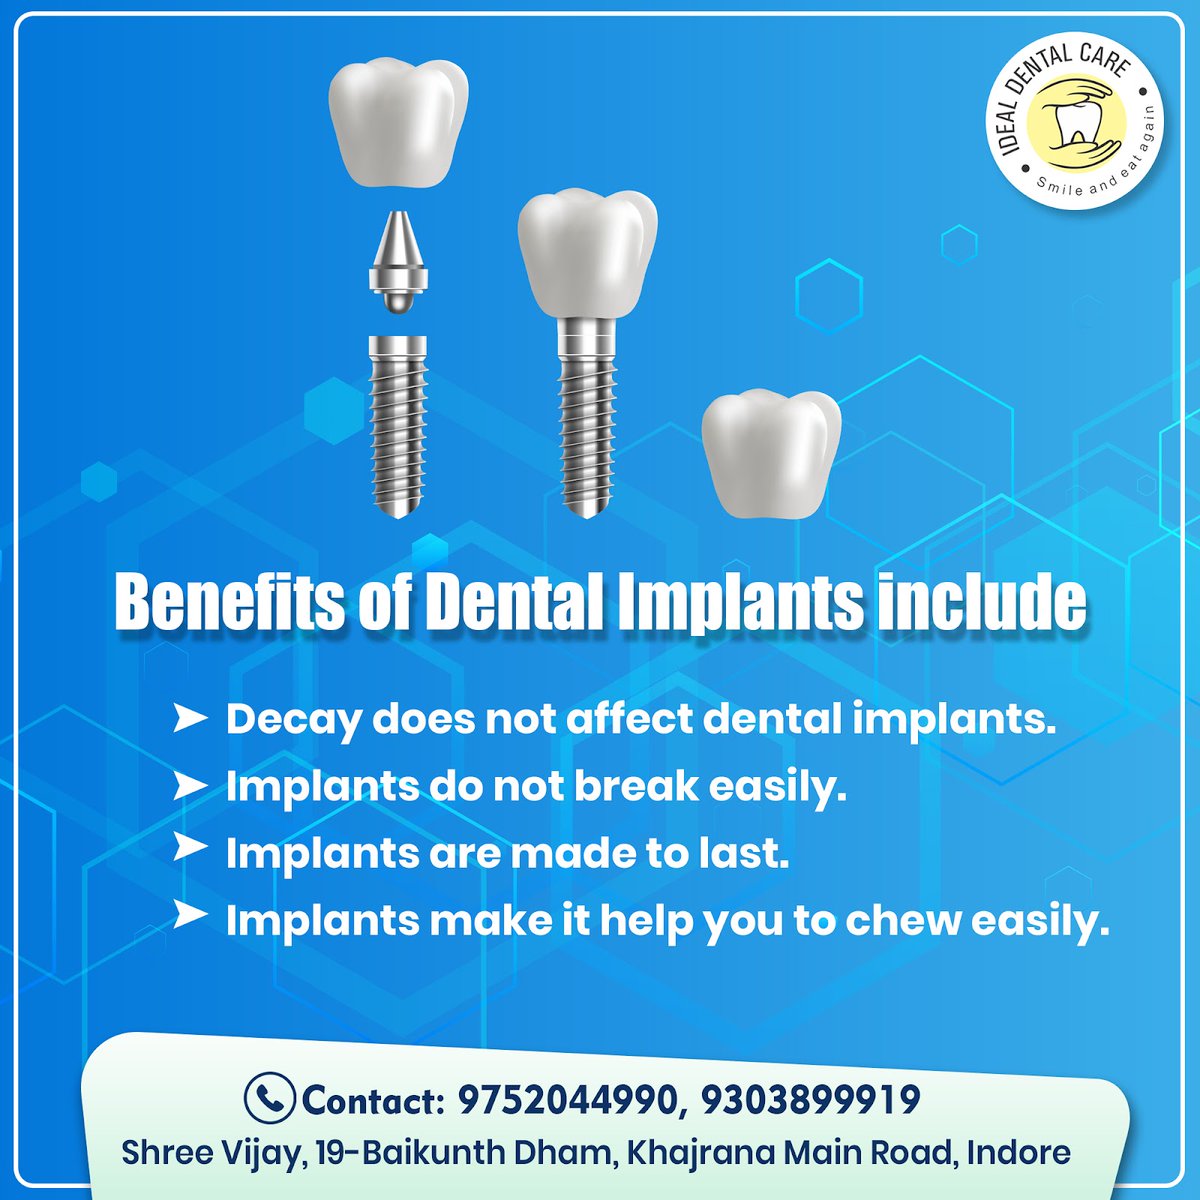 Dental Implant Treatment is the optimum dental care procedure to help you chew easily and has multiple benefits. 

Now, smile flawlessly with 100% painless dental implants from Ideal Dental Care. 

Book an appointment today!

https://t.co/LcRam0sCtb https://t.co/SDafCrOQ9B